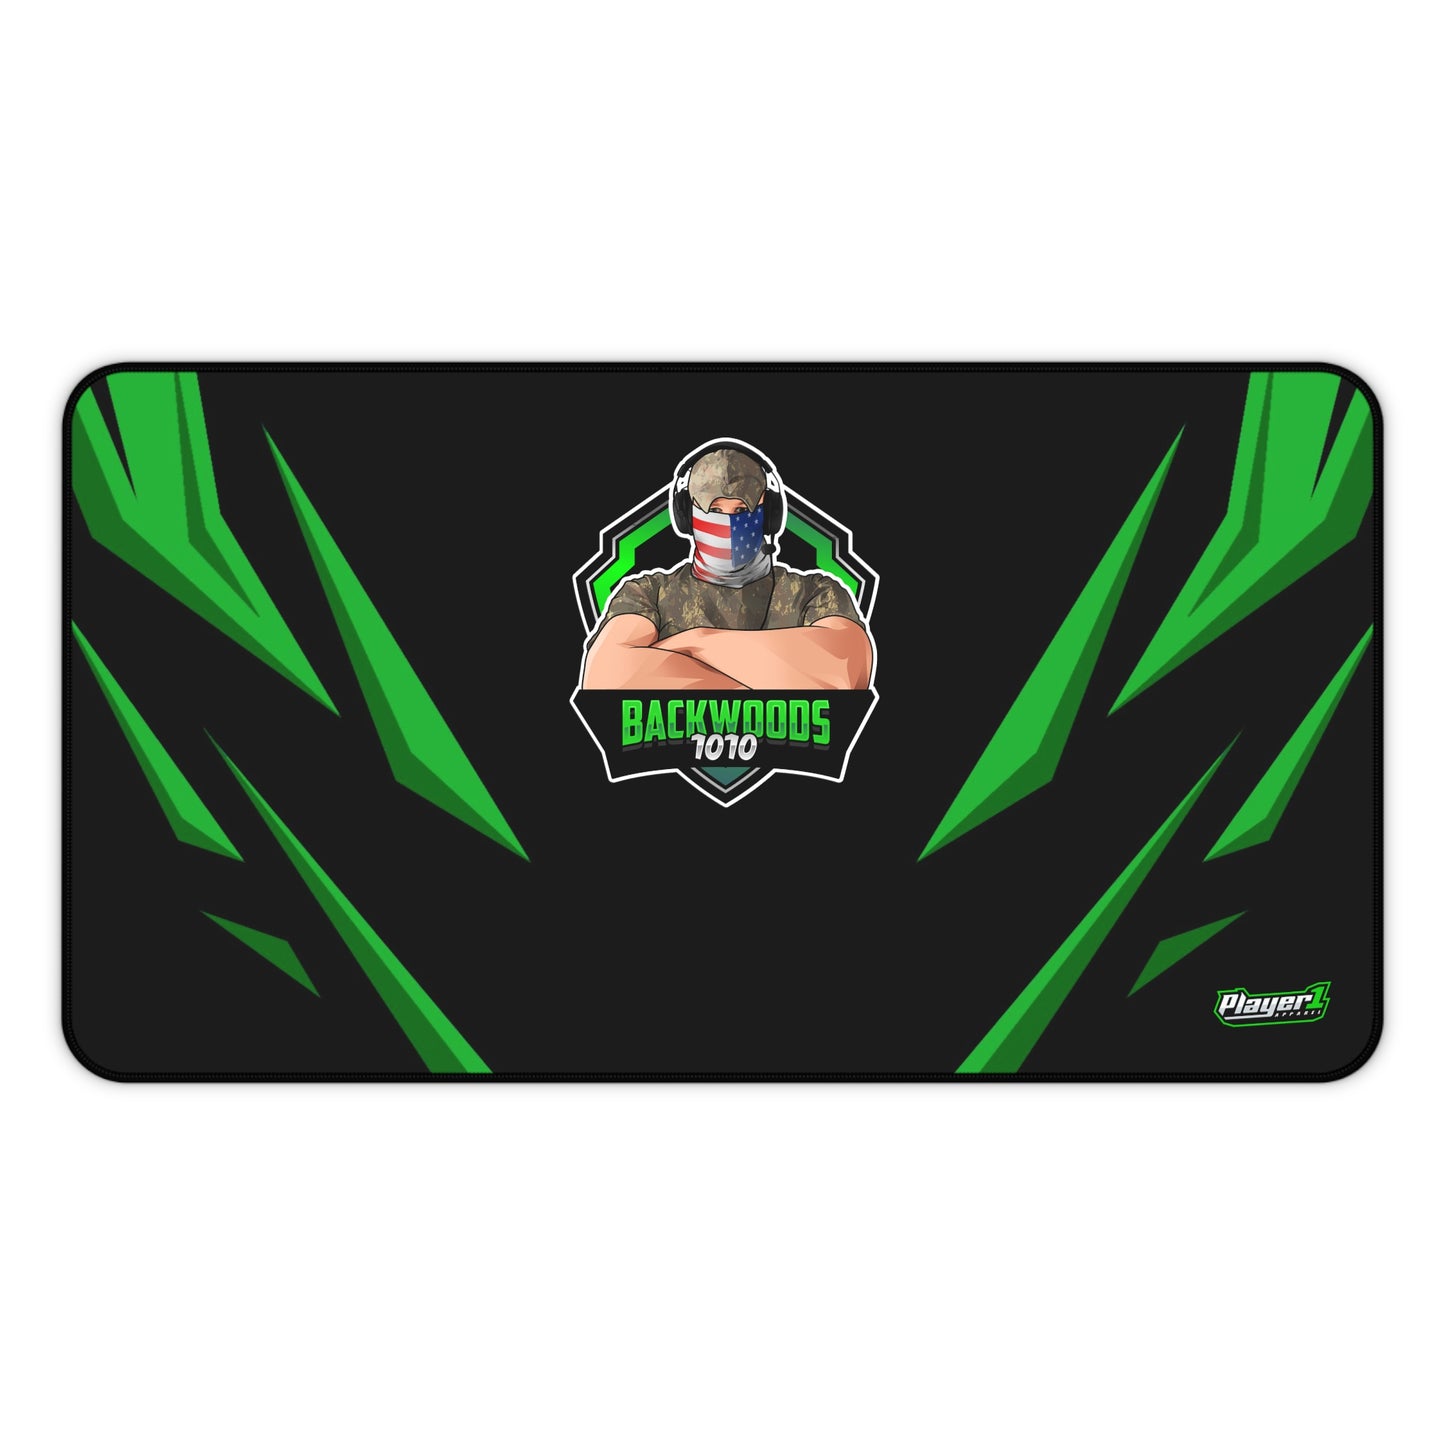 Backwoods1010 Mouse Pad